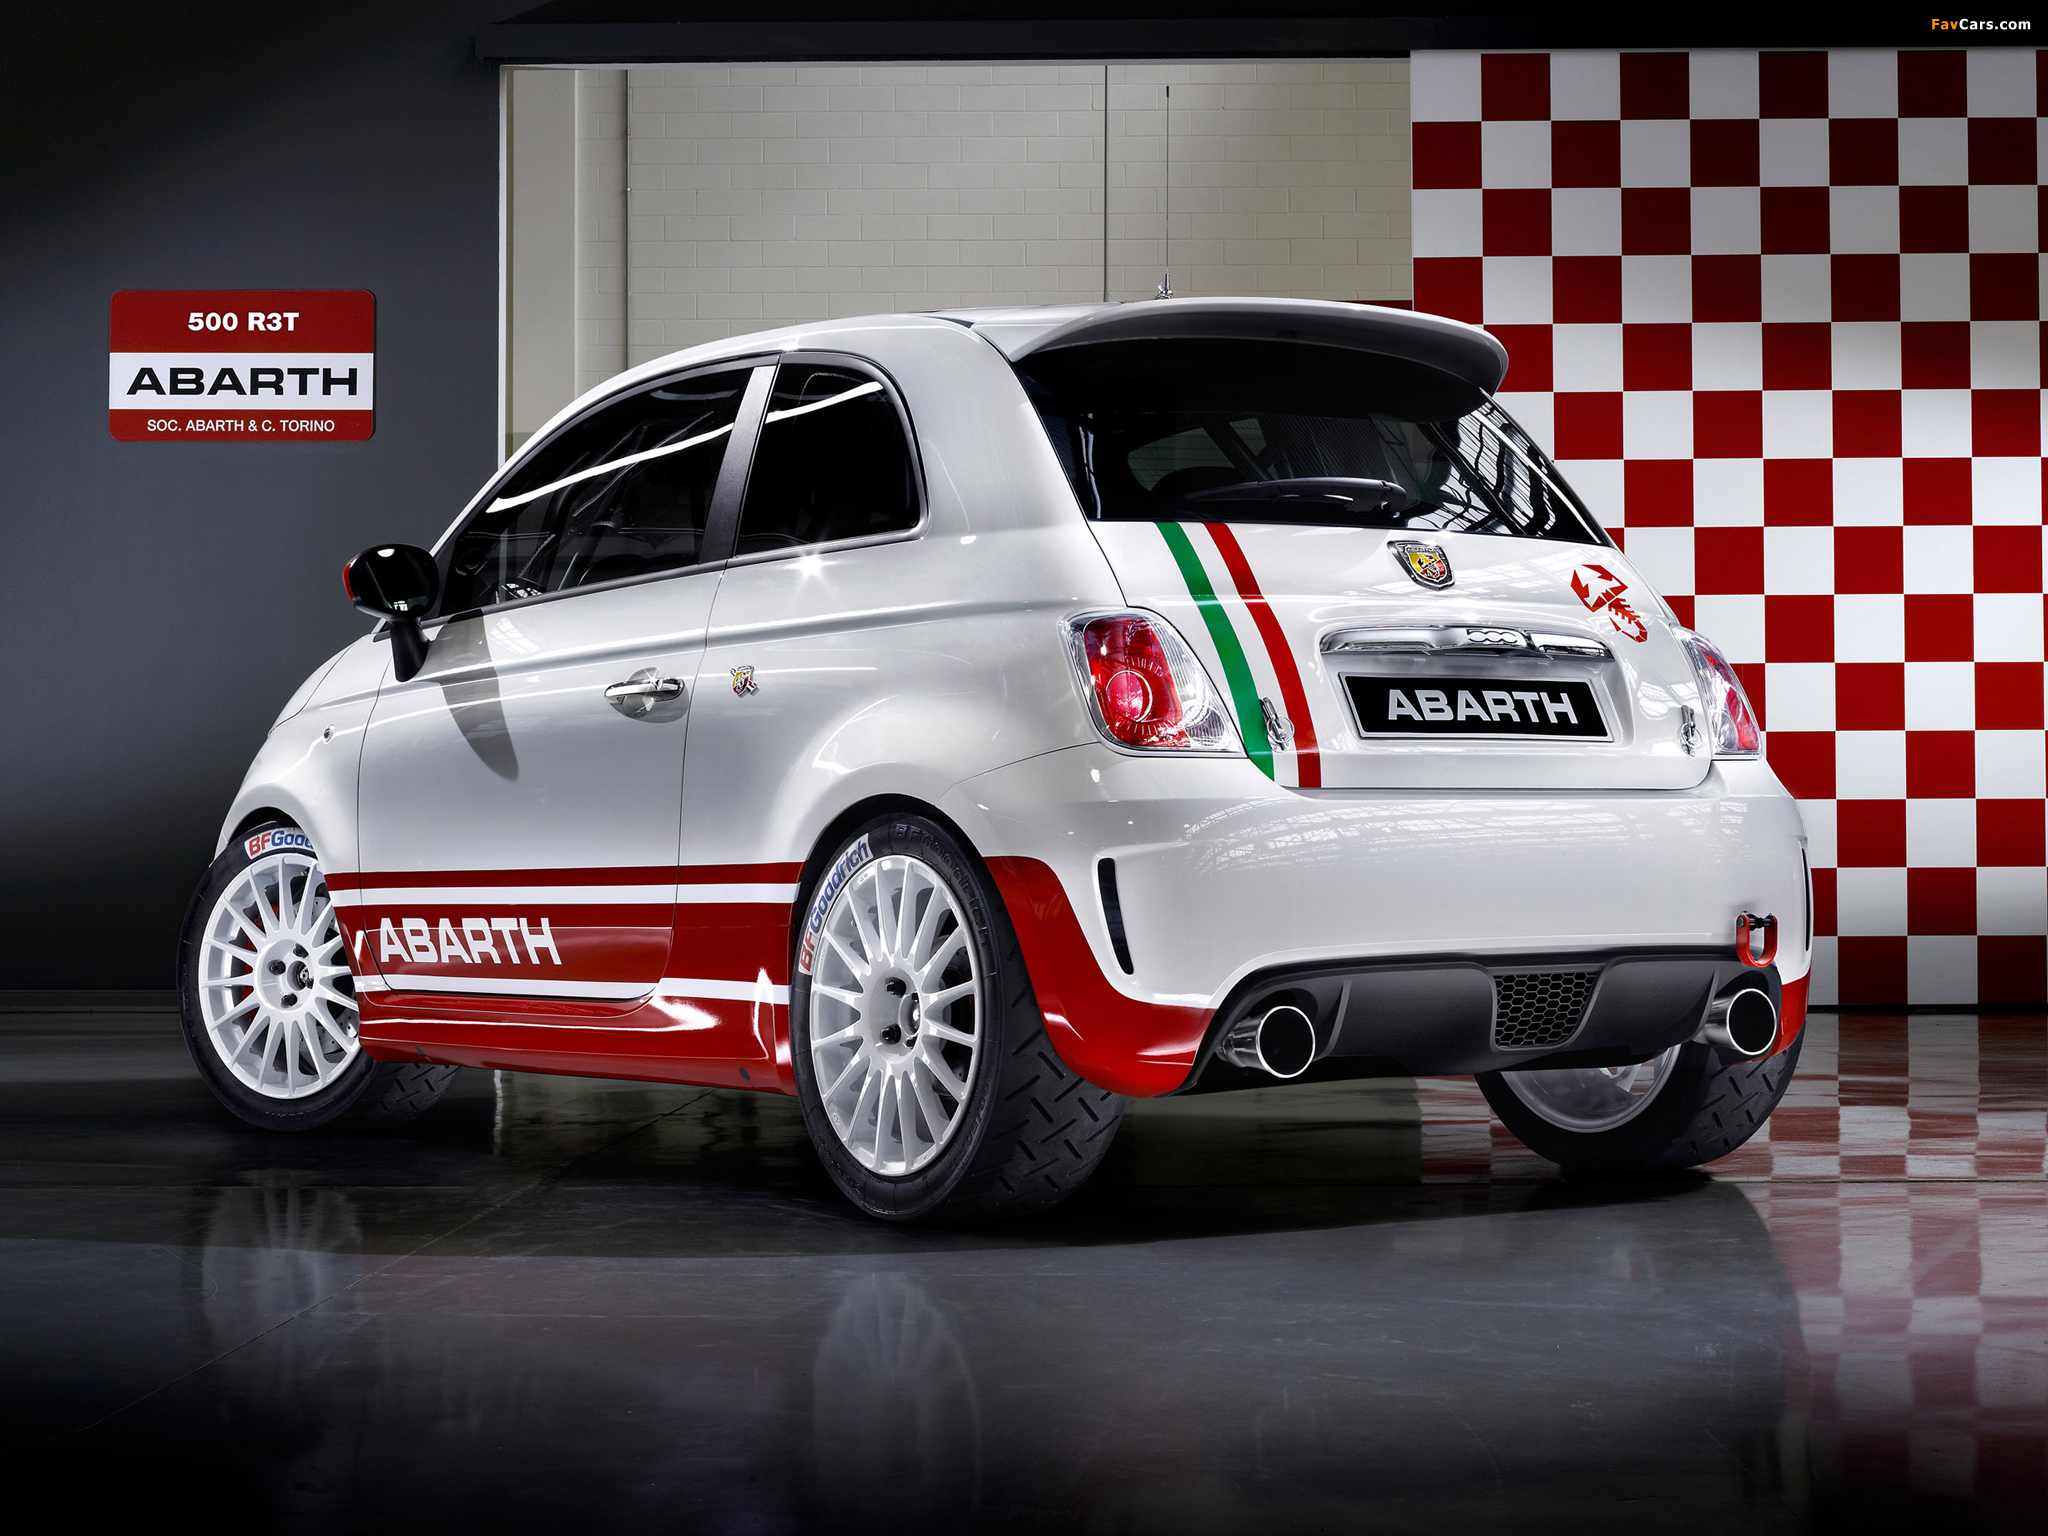 Abarth 500 R3T (2009) images (2048 x 1536)